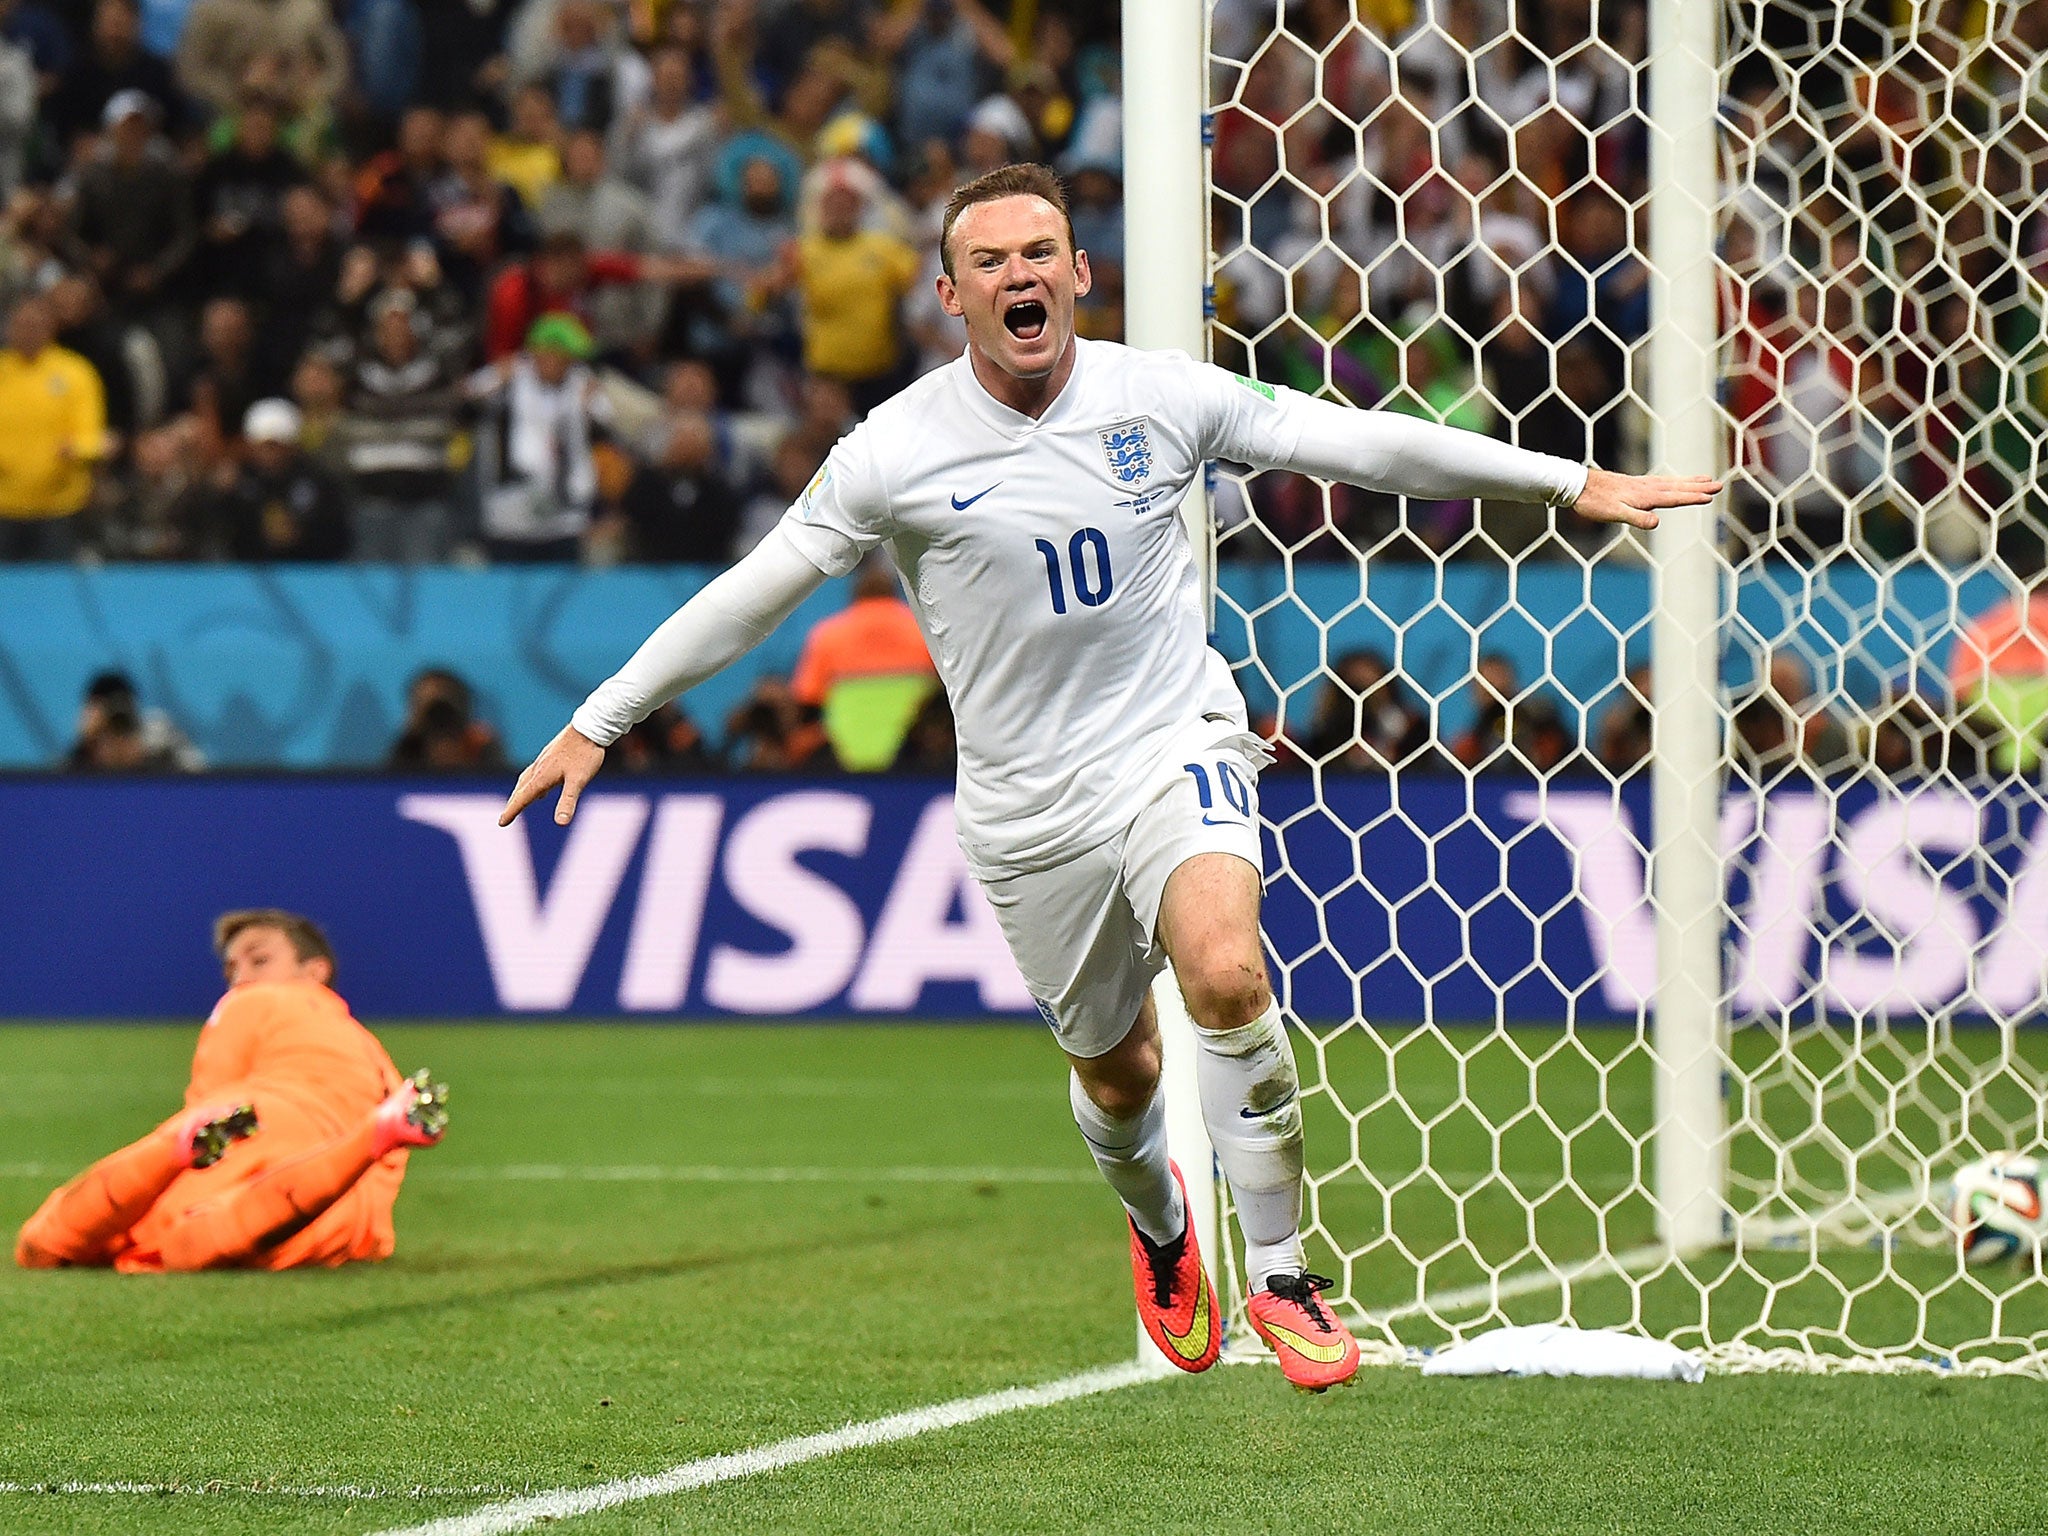 Wayne Rooney wheels away in celebration after scoring his first World Cup goal